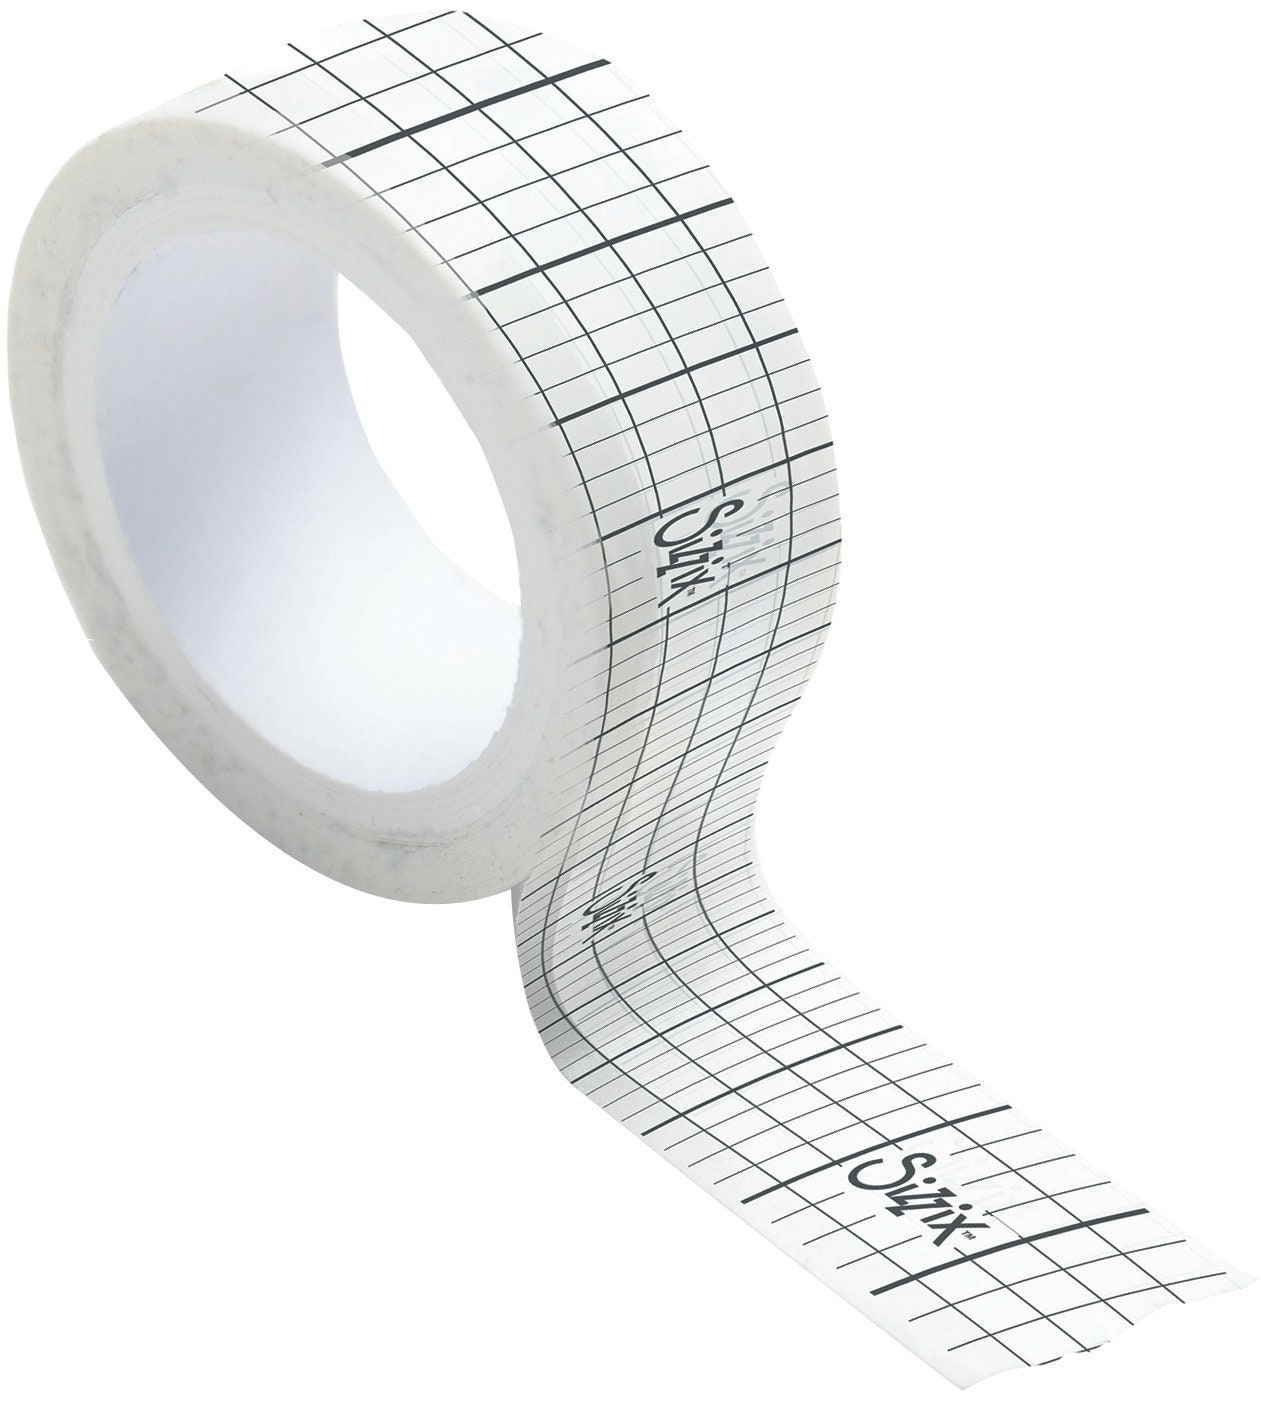 3 ROLLS 1/8 x 27 yrd Scor-Tape double sided tape - 81 Yards Total